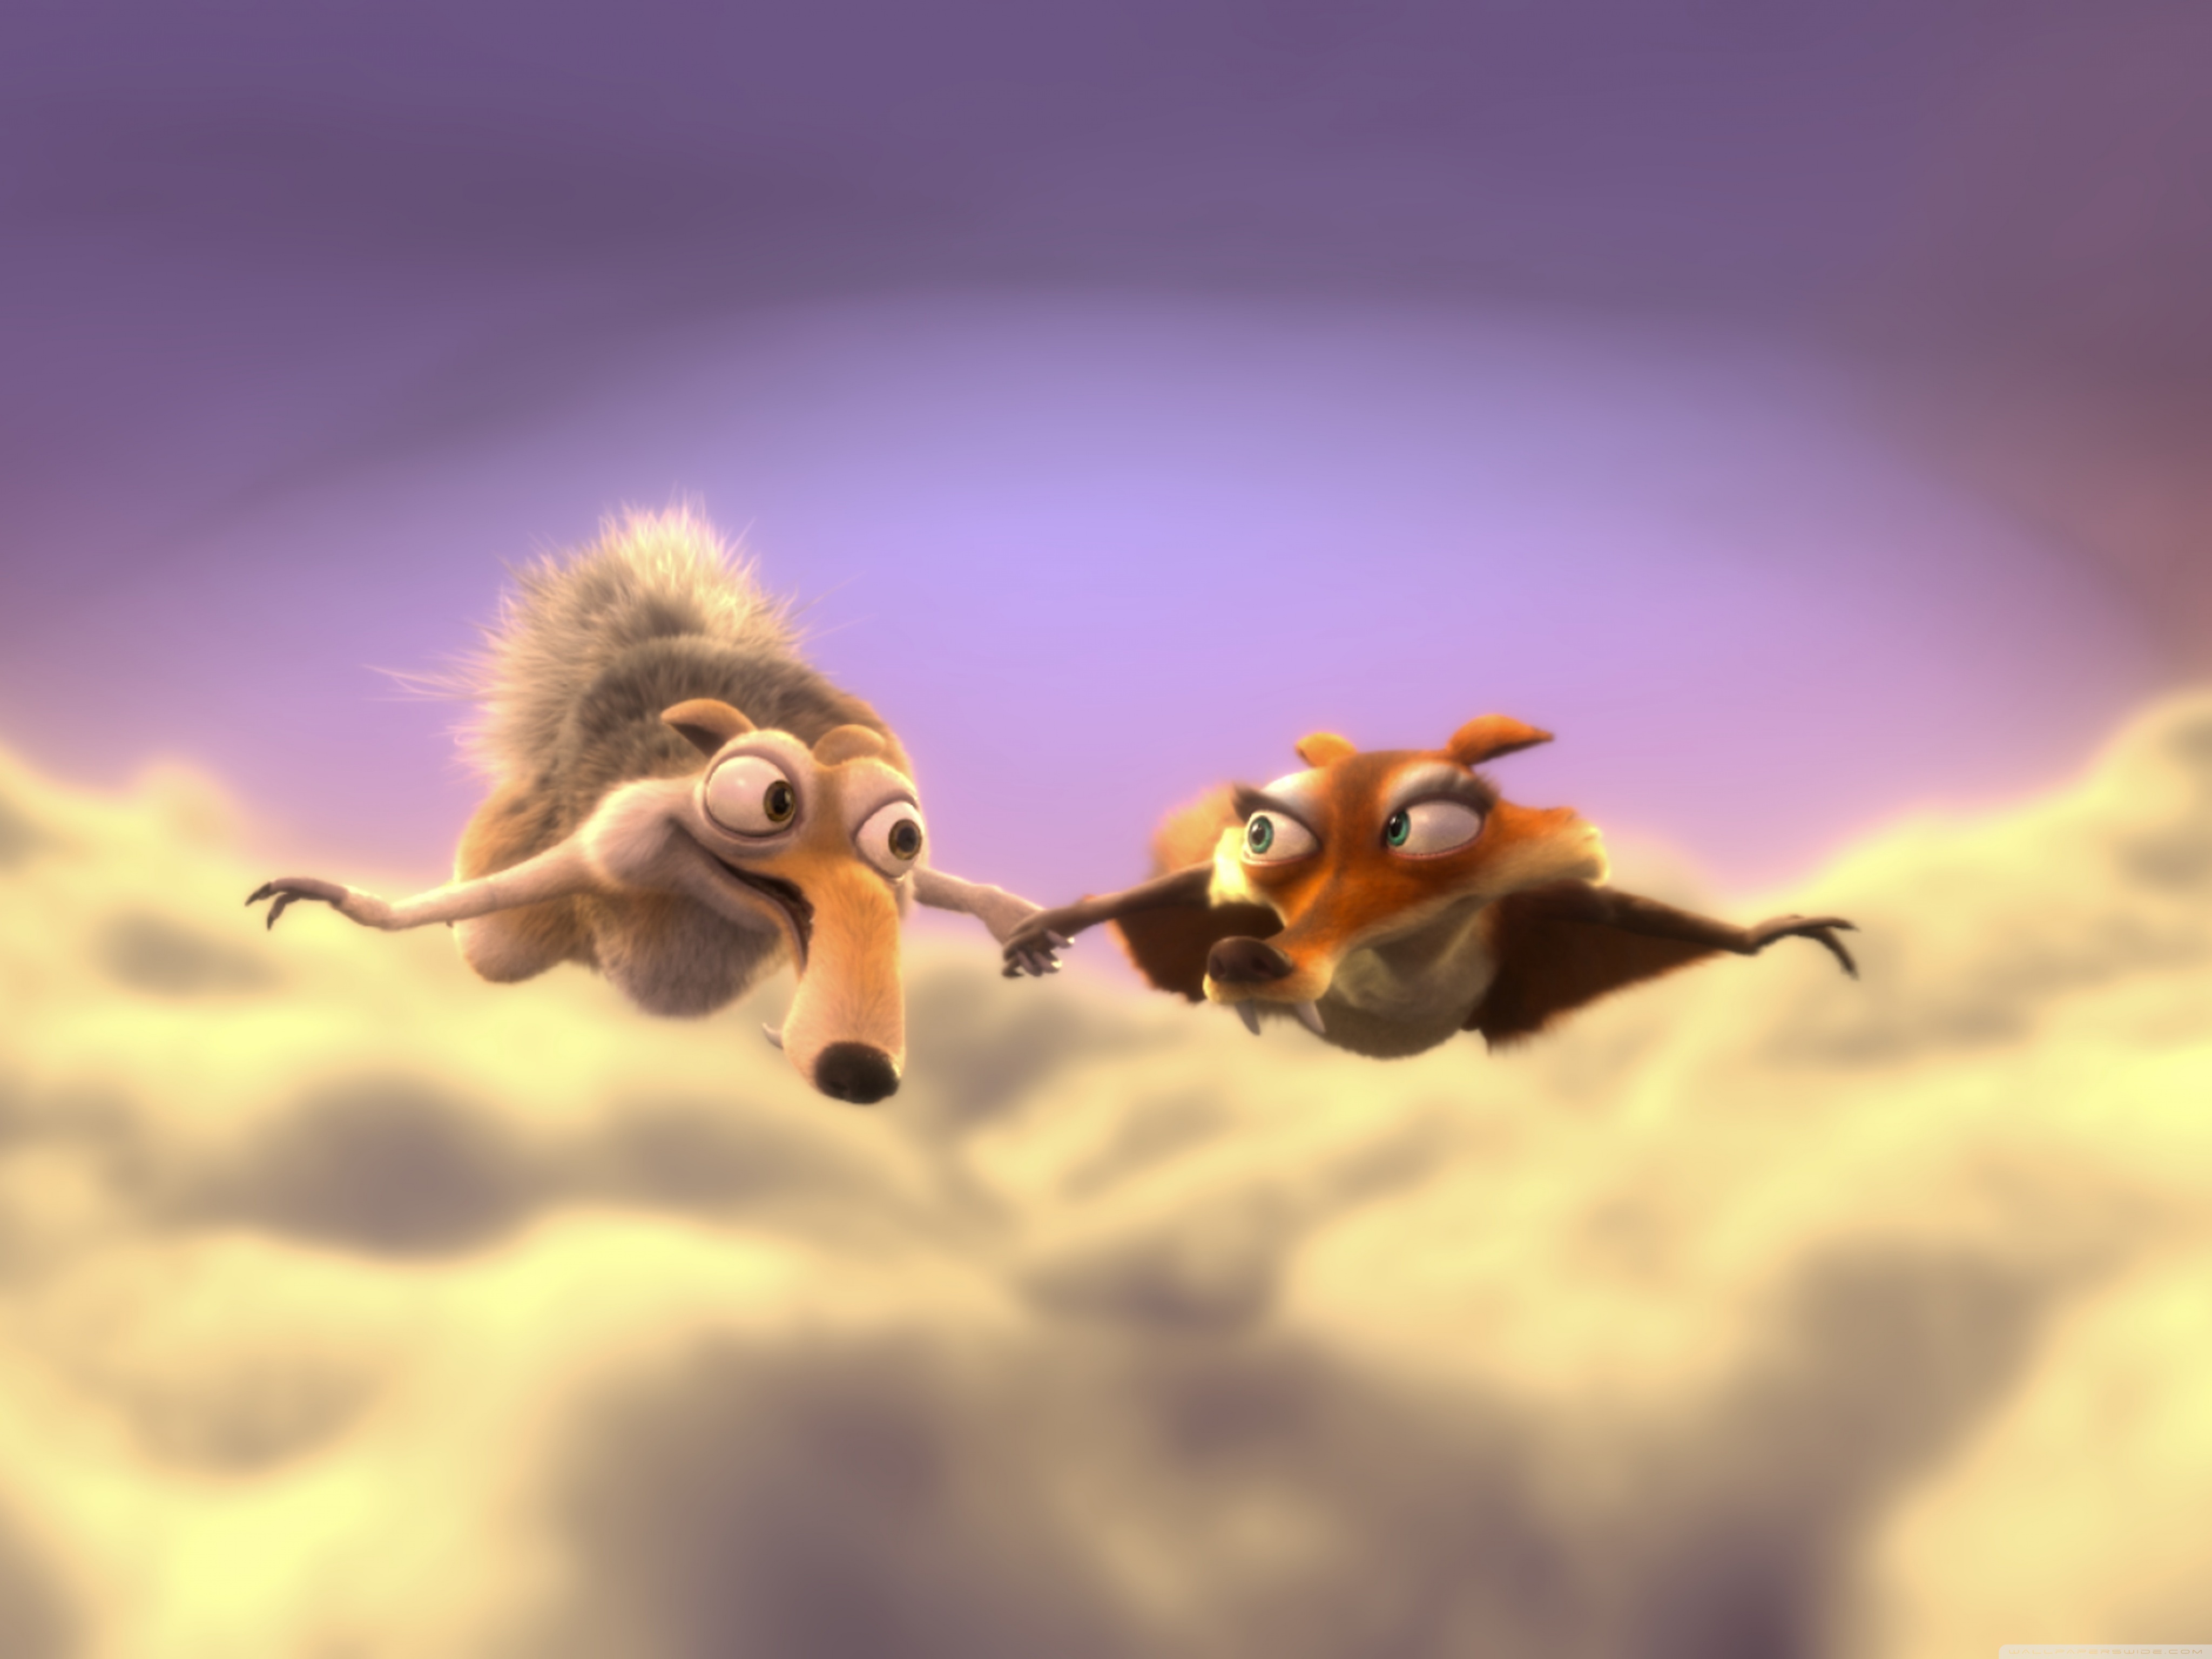 Download Ice Age 3 Dawn of the Dinosaurs - Scrat and... 